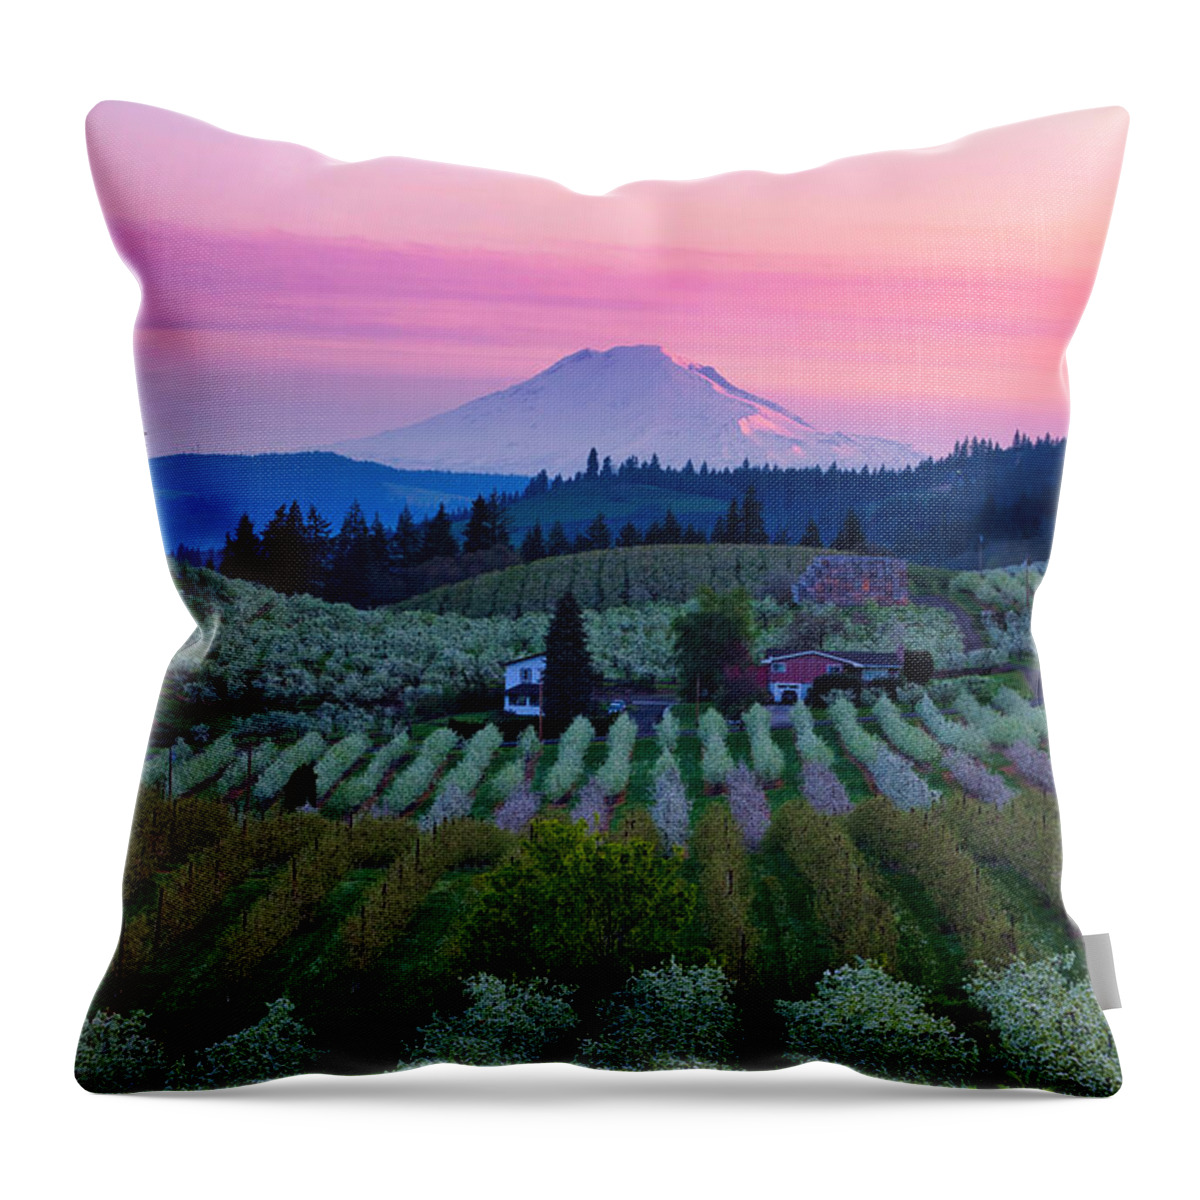 Pink Sunrise And Pear Blossoms Throw Pillow featuring the photograph Pink Sunrise and Pear Blossoms by Lynn Hopwood